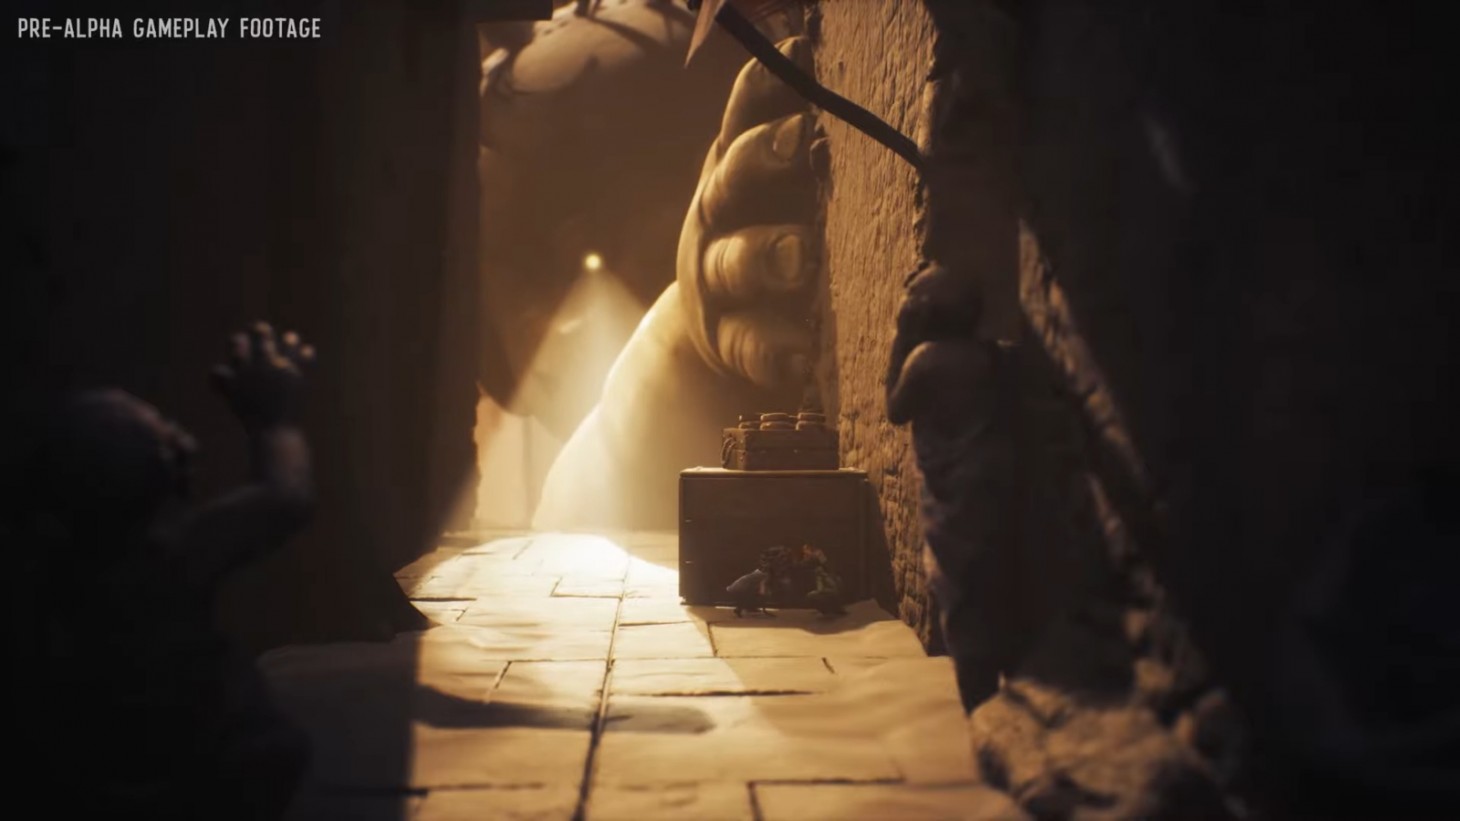 Check Out 18 Minutes Of Unsettling Little Nightmares 3 Co-Op Gameplay -  Game Informer